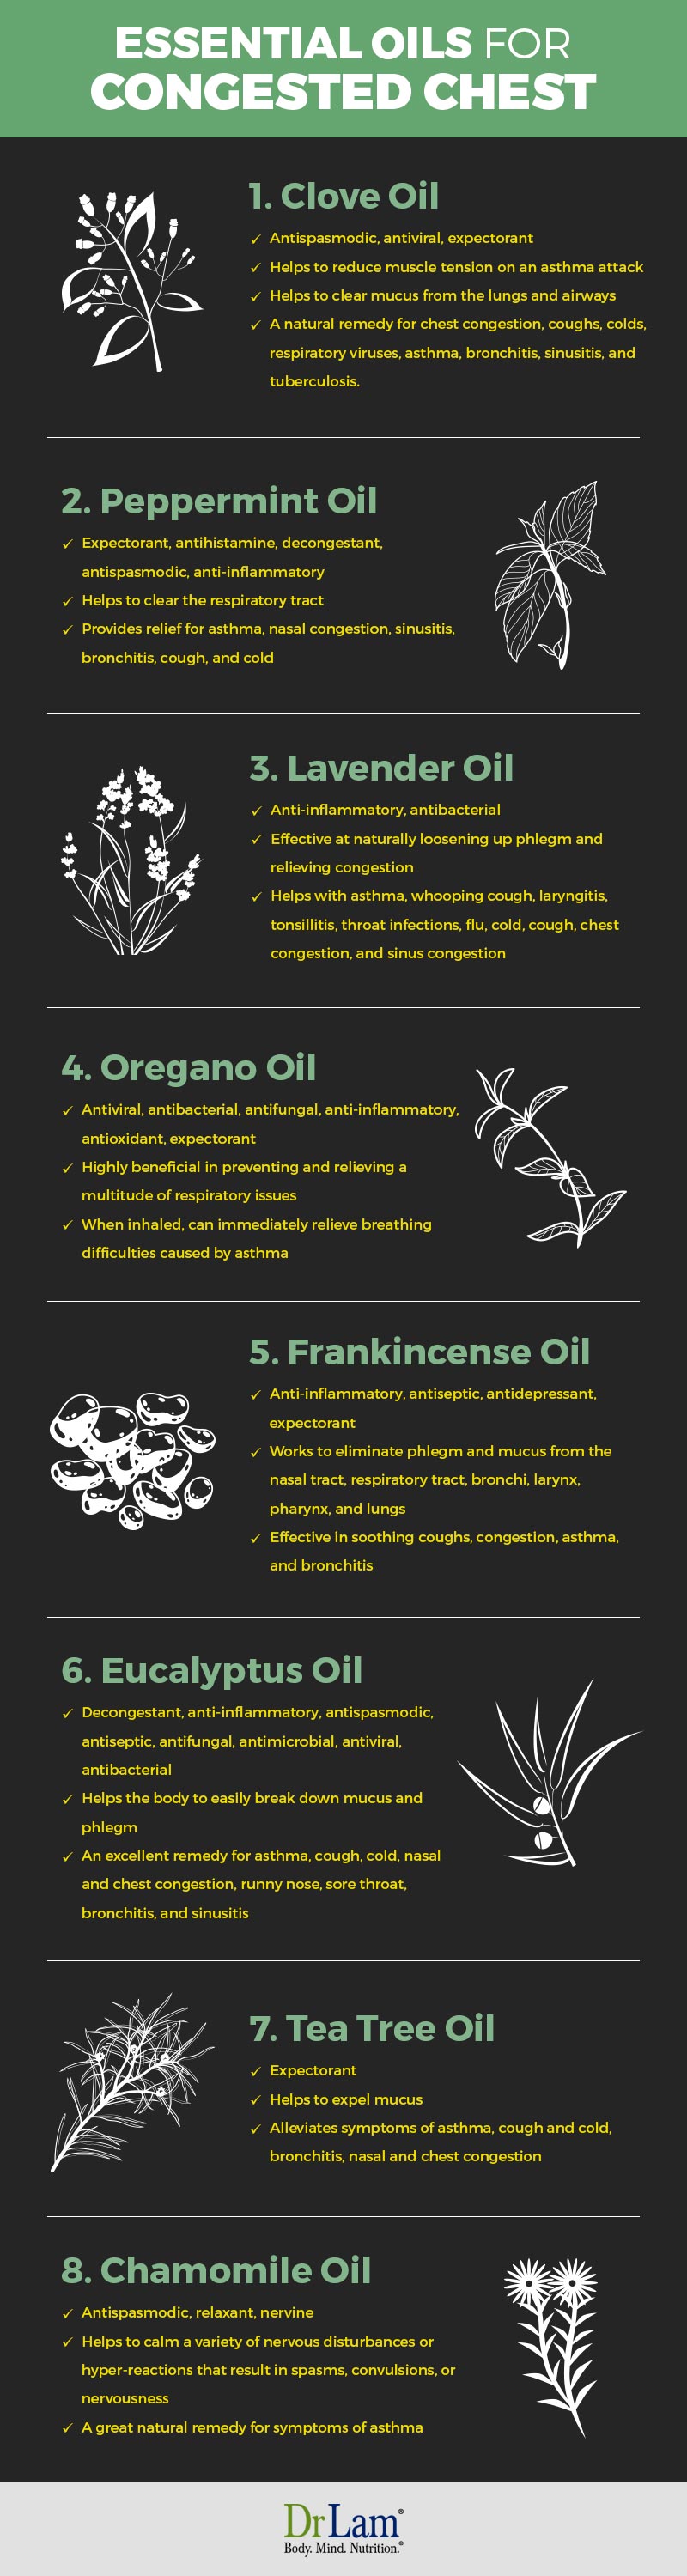 Check out this easy to understand infographic about use of essential oils for congested chest